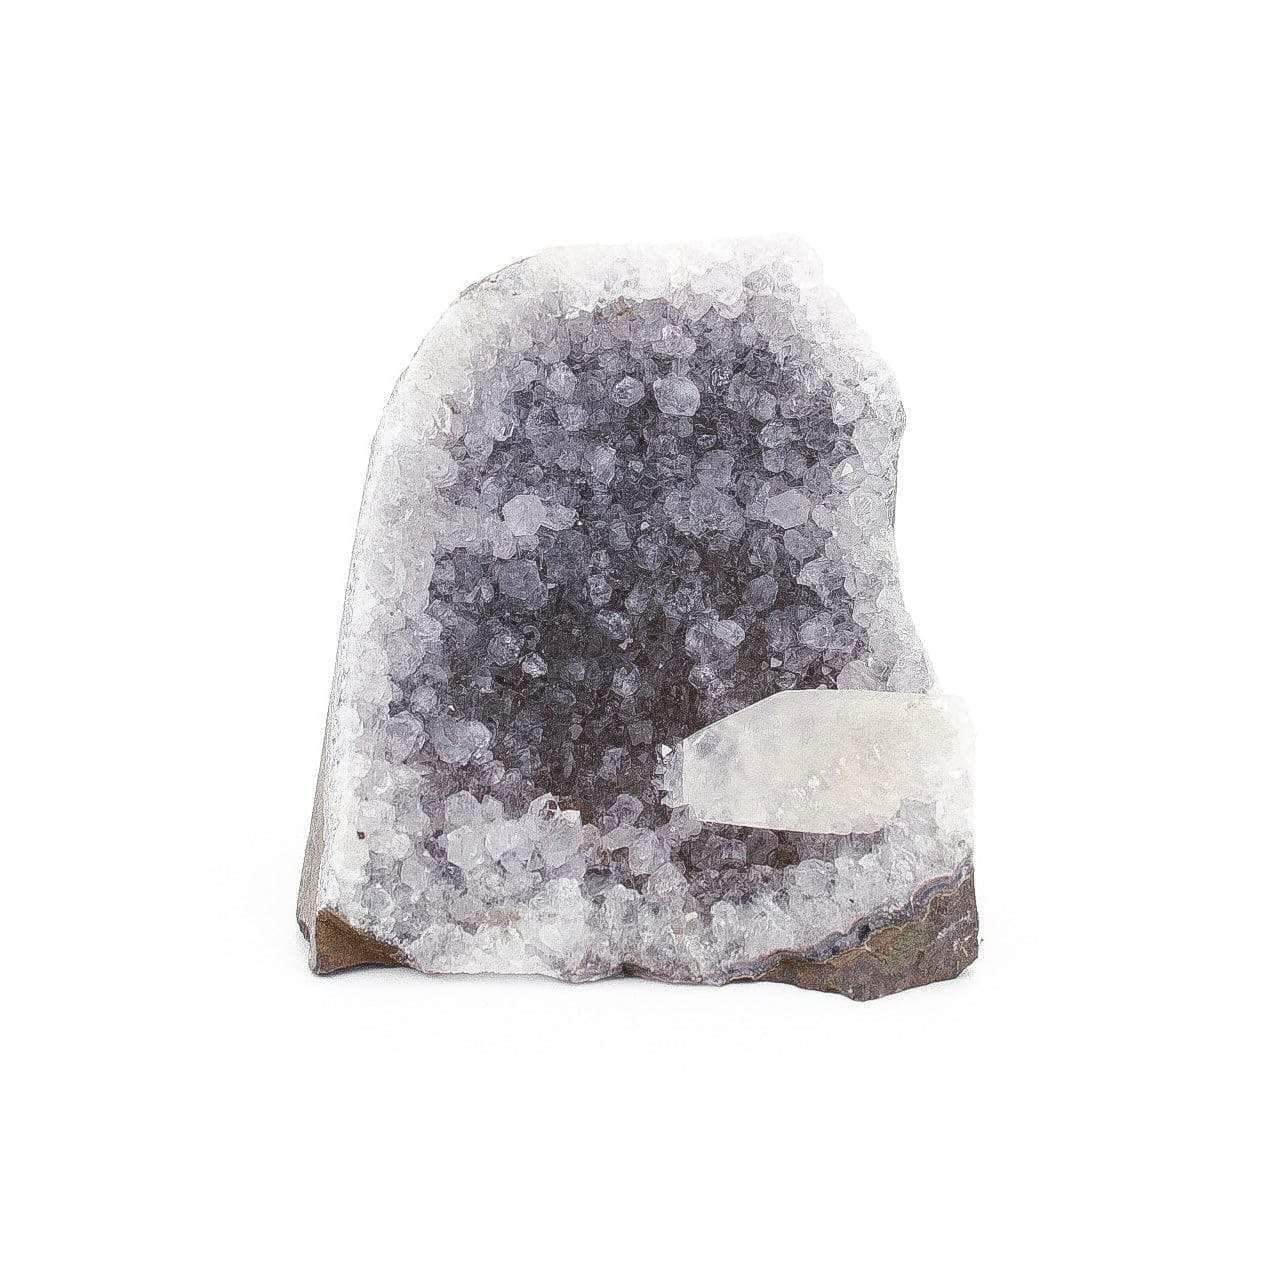 6-11 Crystals Crystal Amethyst with Calcite Specimen ~3" x 3" x 3.25"